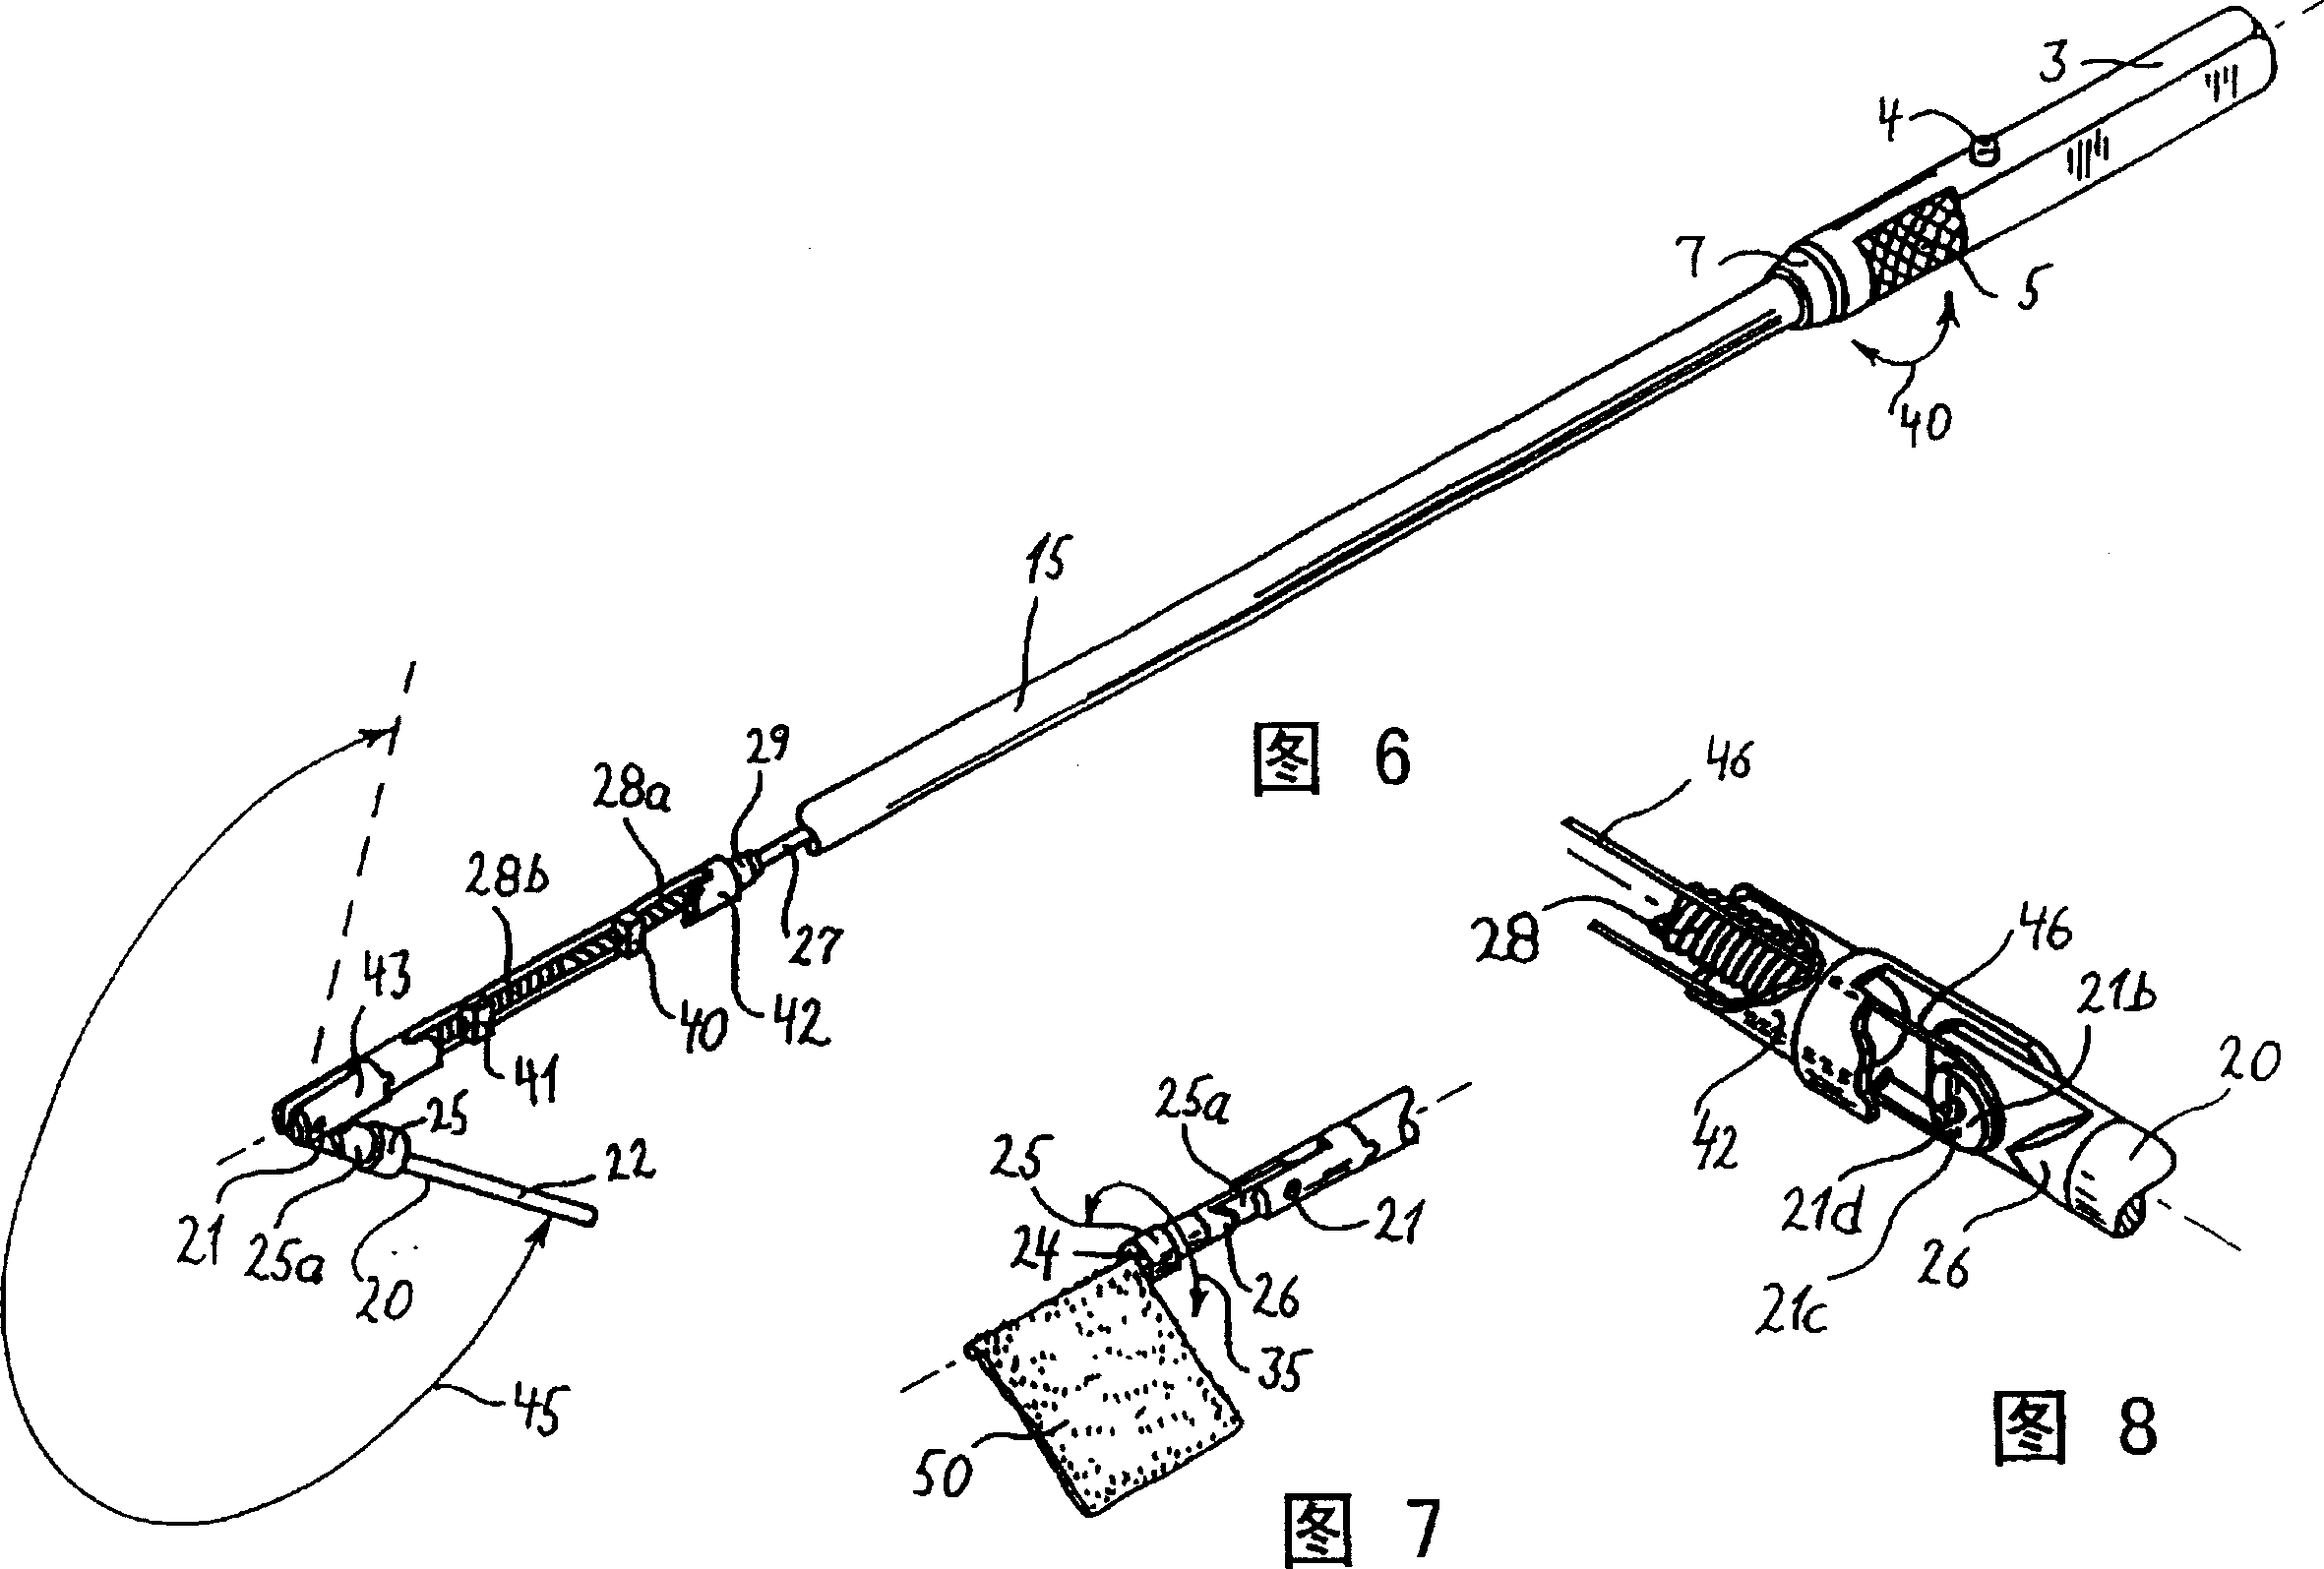 Instrument for apptication of surgieal material